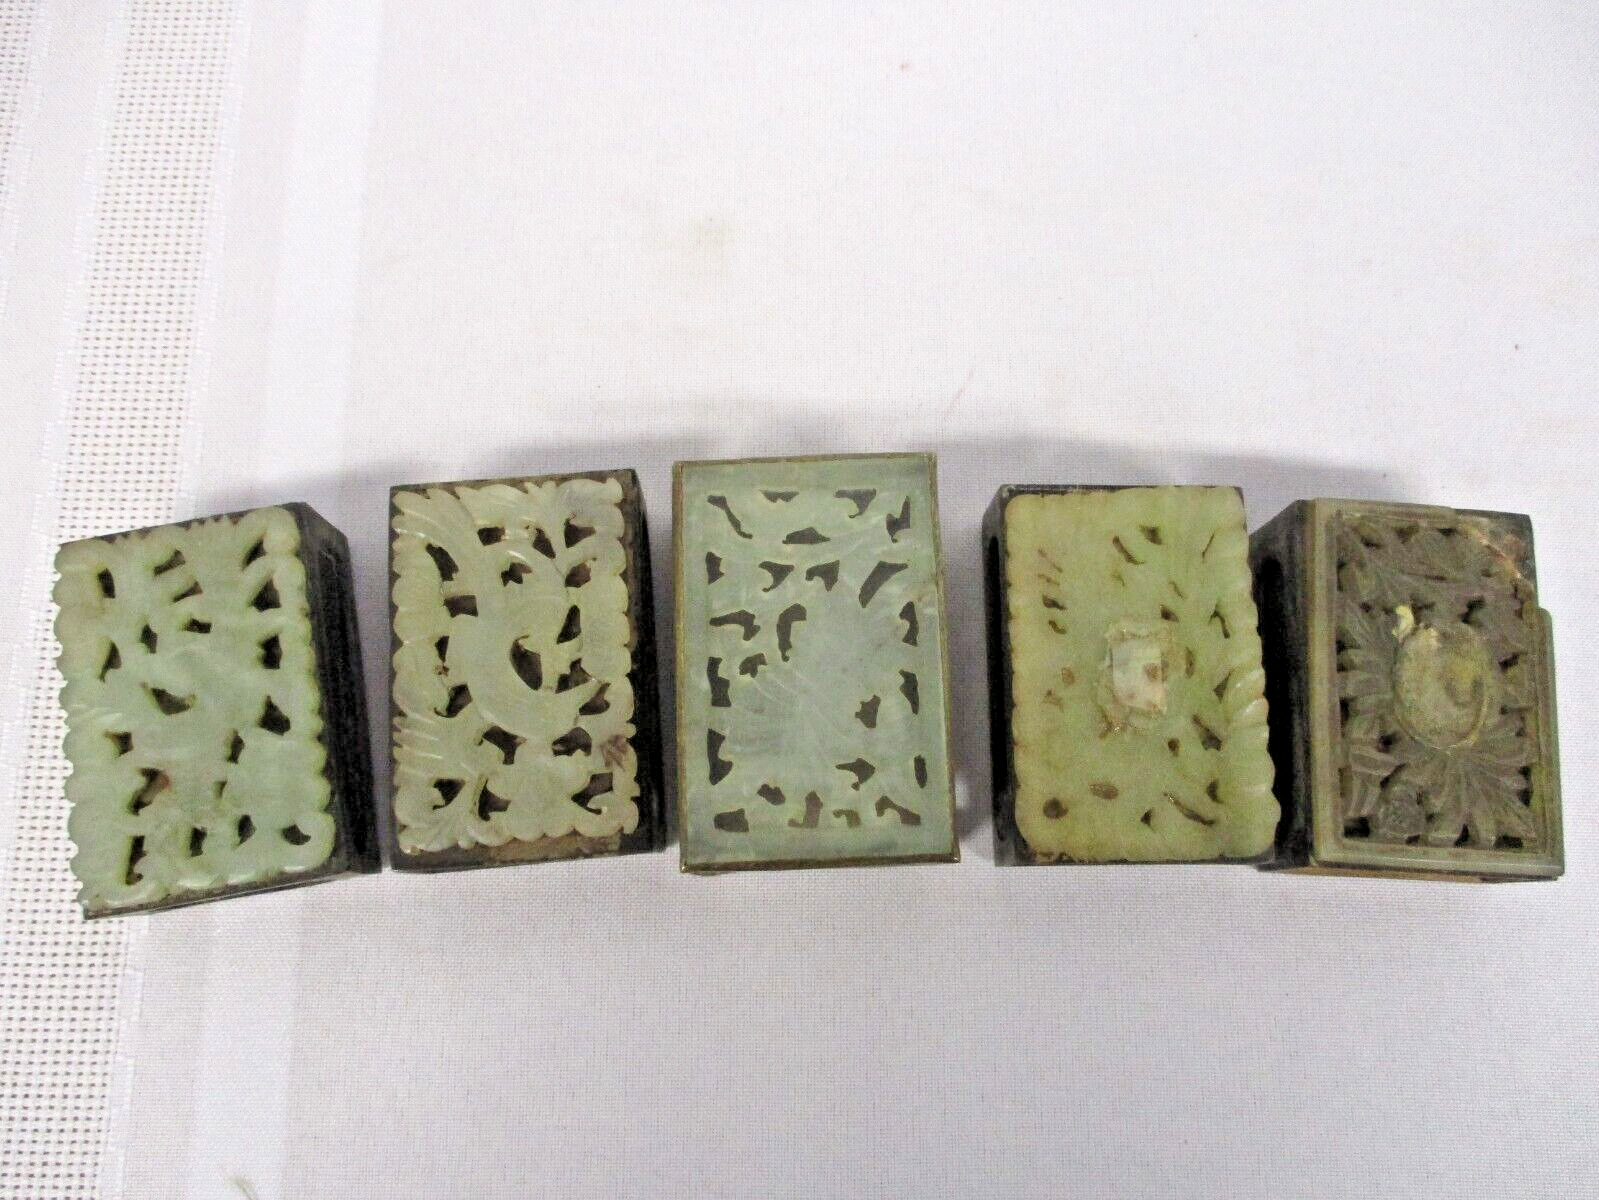 5 ANTIQUE CHINESE CARVED JADE BIRD FLOWER MATCH BOX HOLDERS